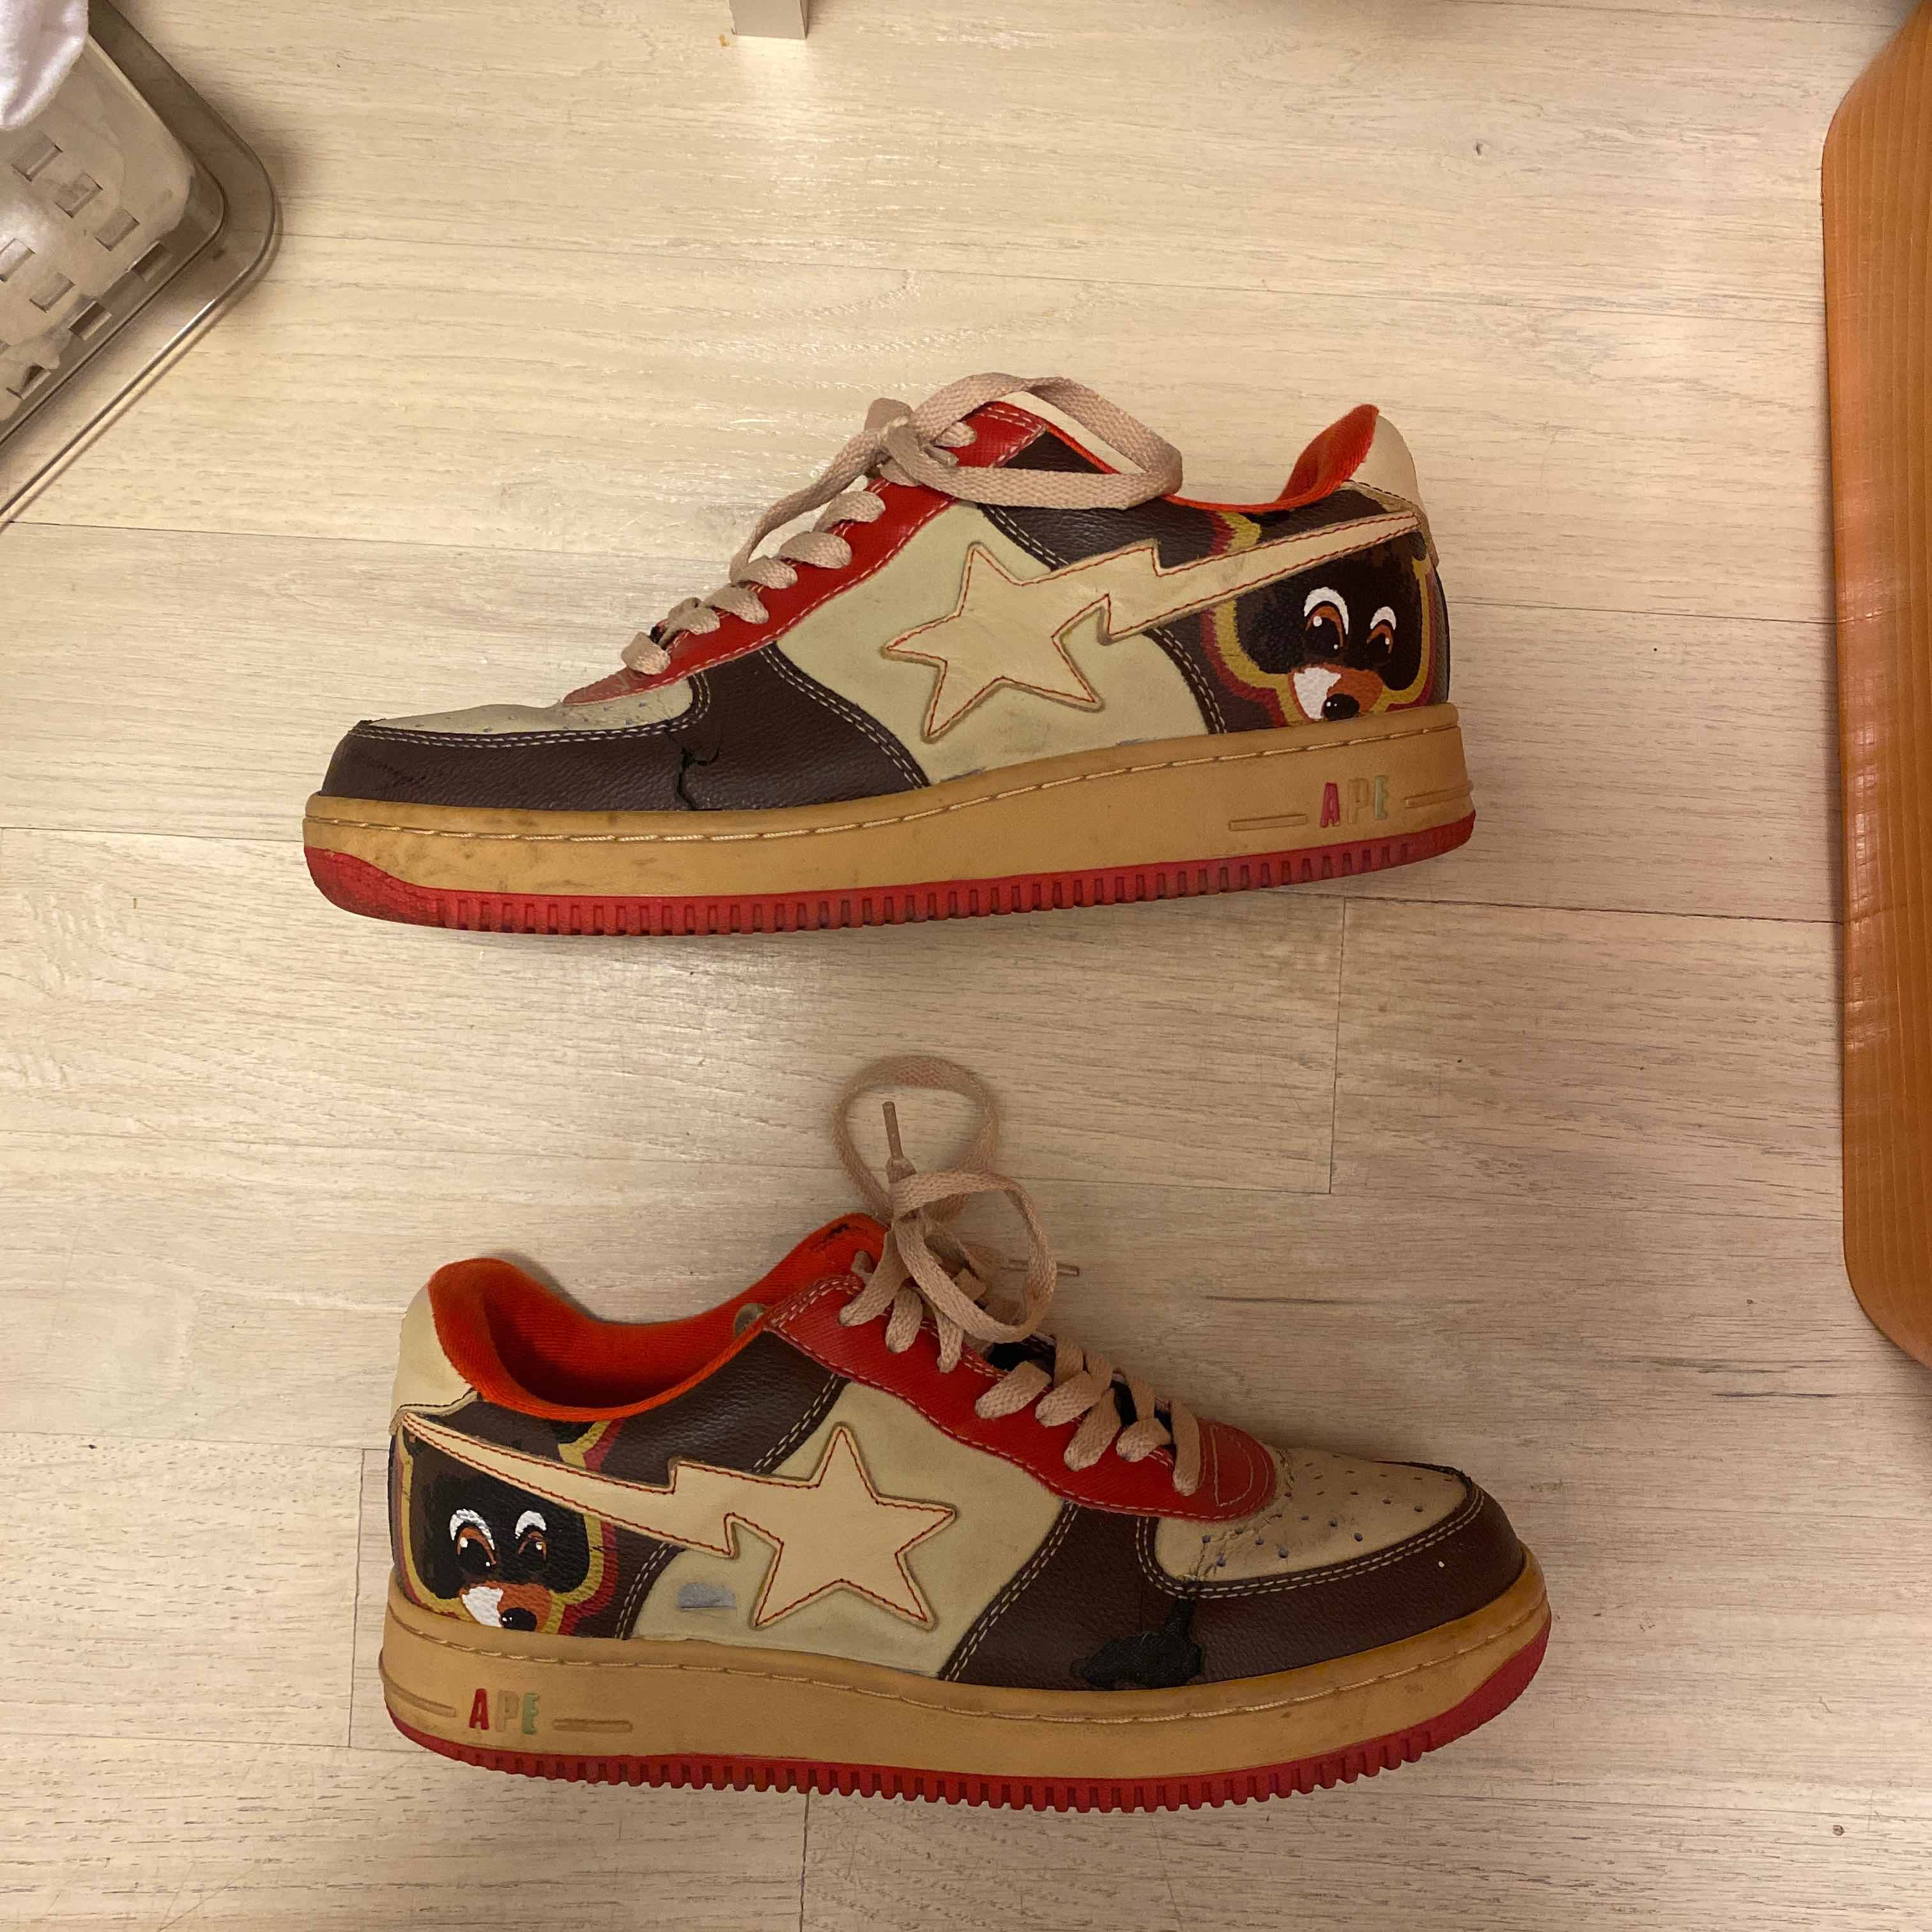 Used Kanye West x Bapesta FS-001 Low 'College Dropout' Prices 